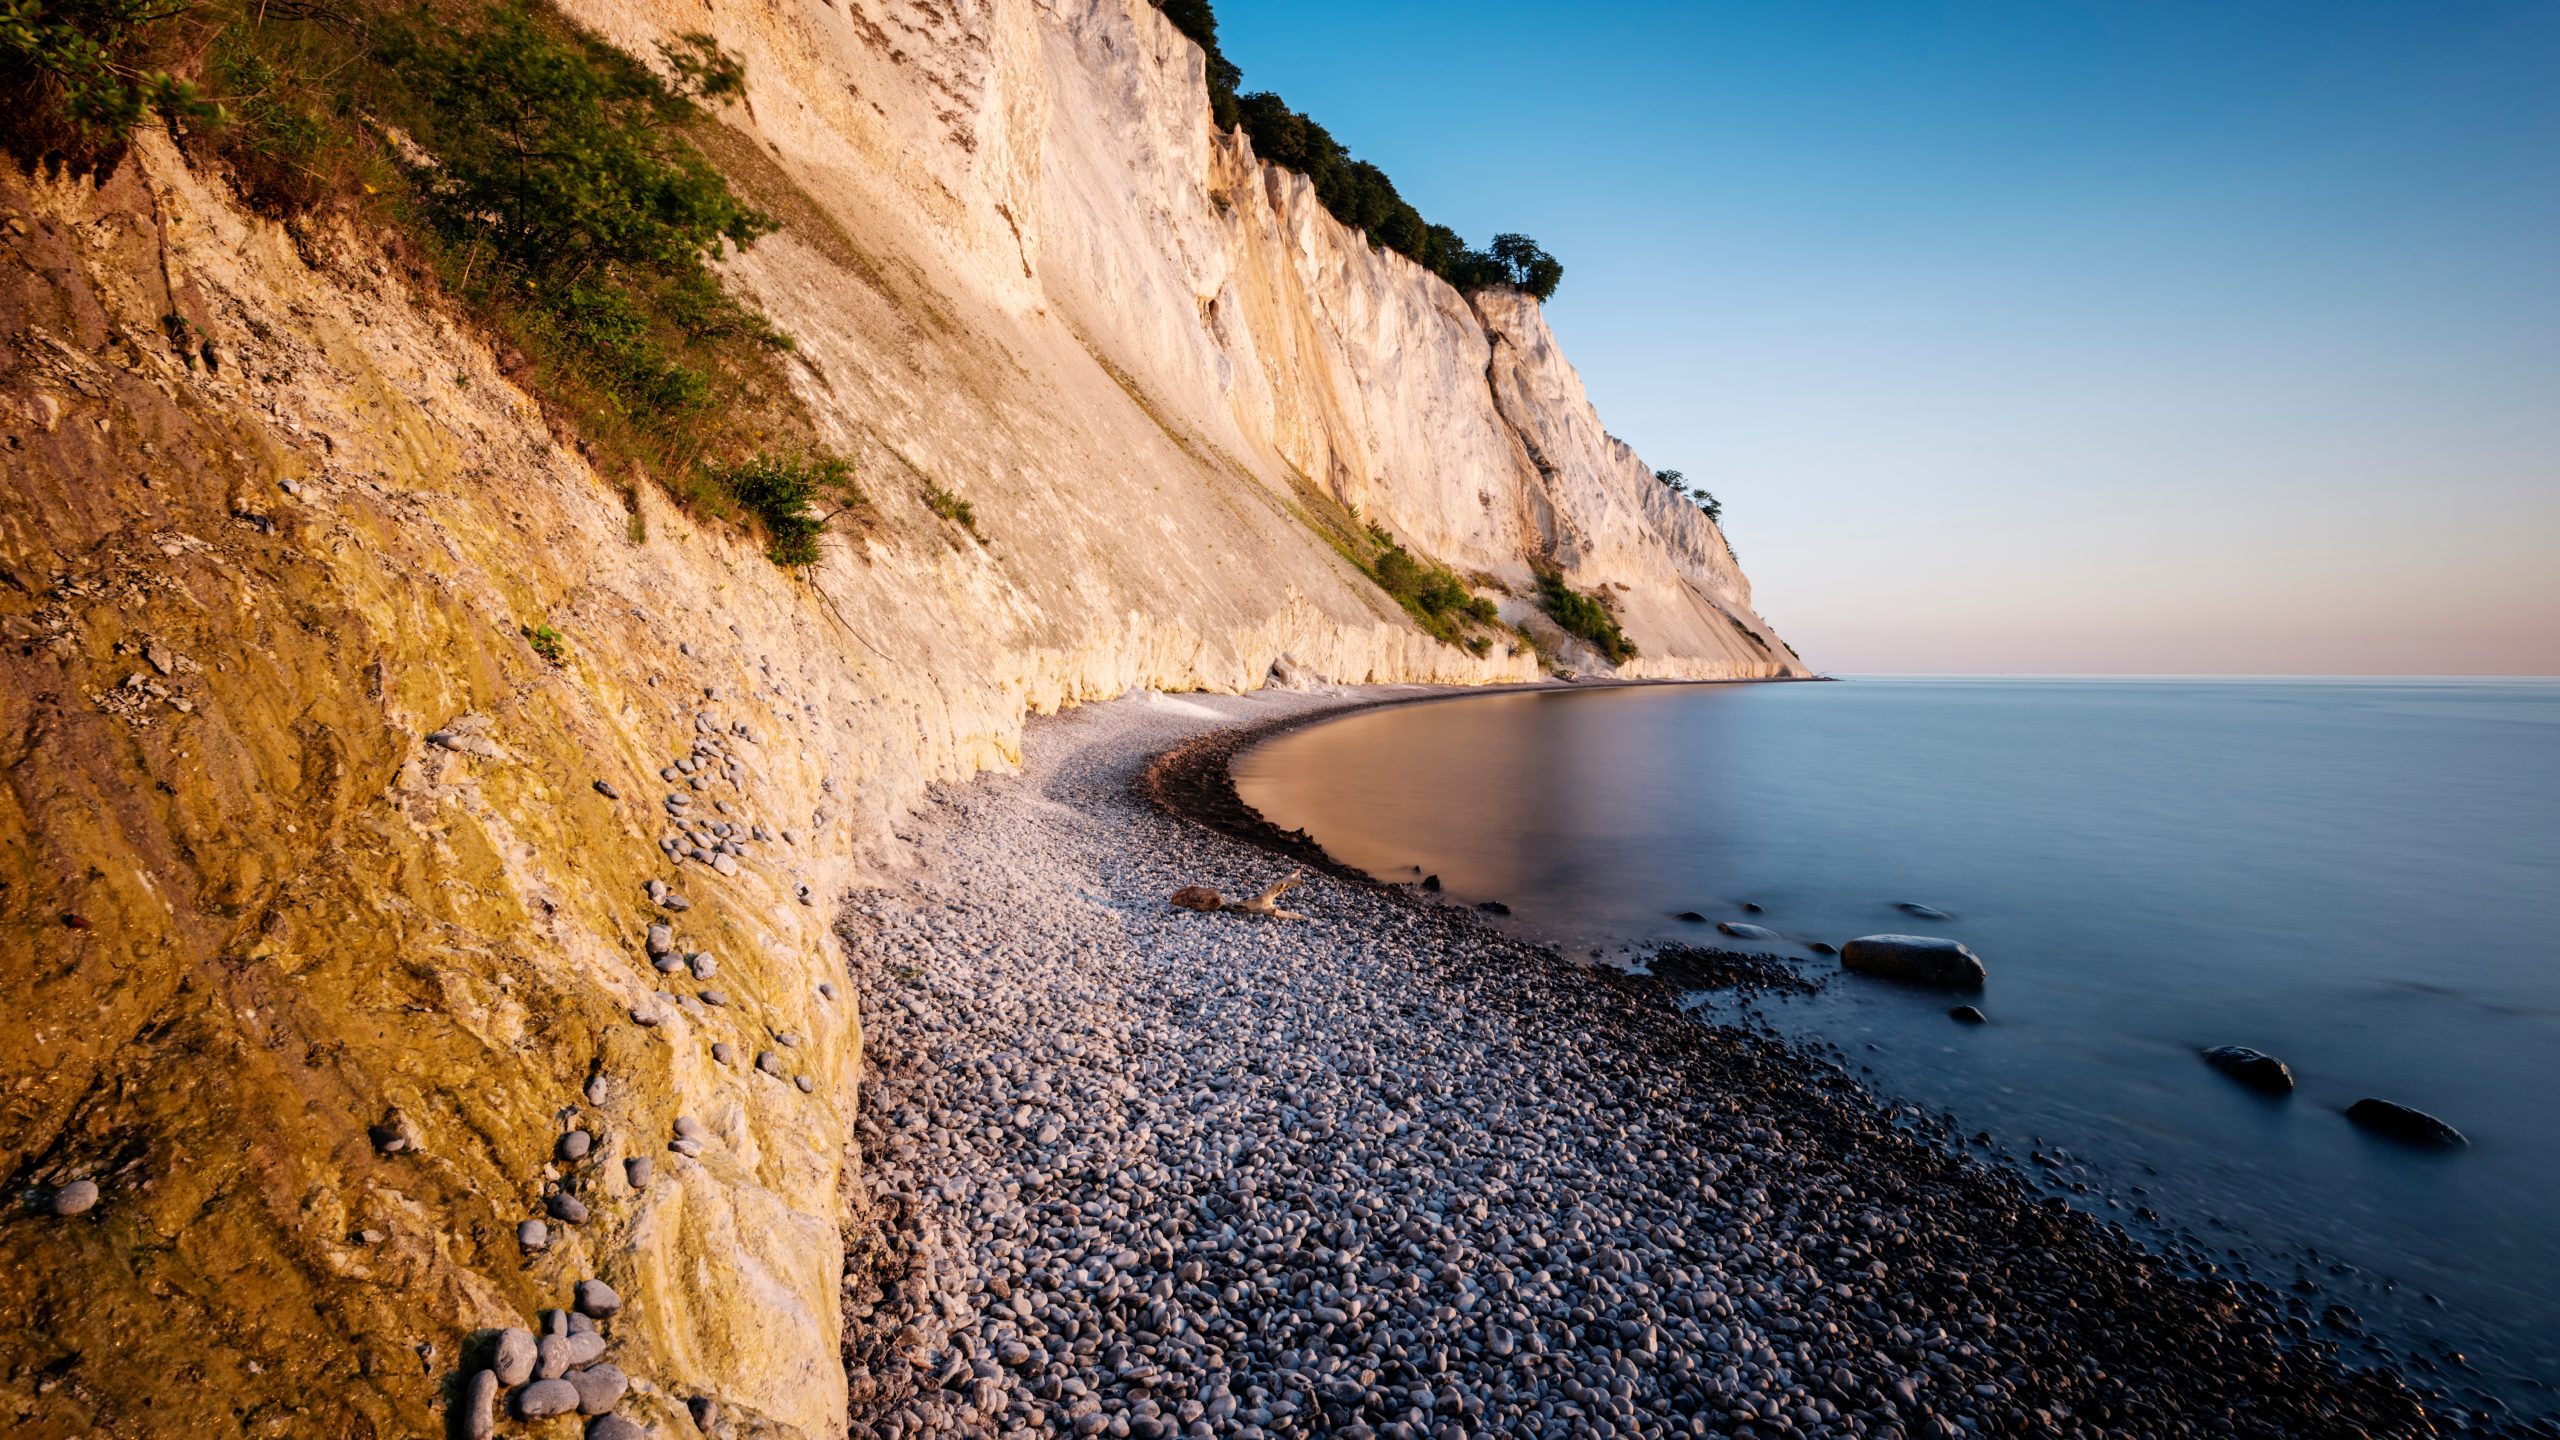 Visiting the white cliffs of Møn - the eighth thing in the 10 best things to do in Denmark